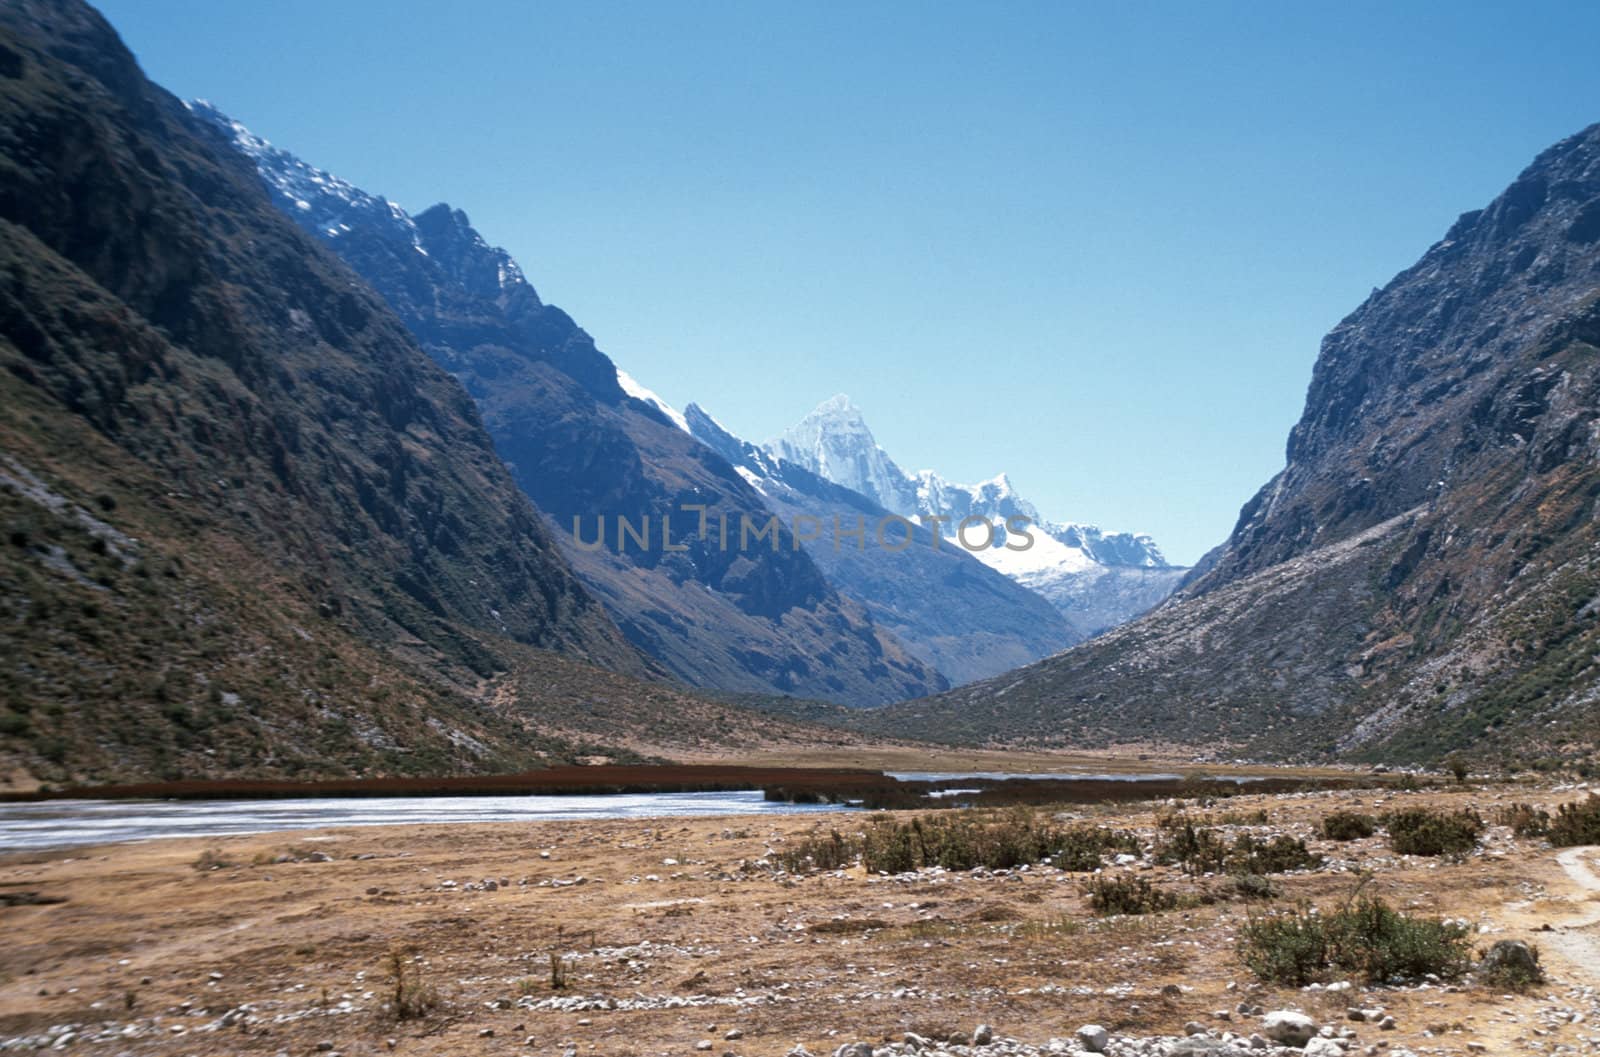 Beautiful high valley in Peru with snow Andes Mountains visible in the background